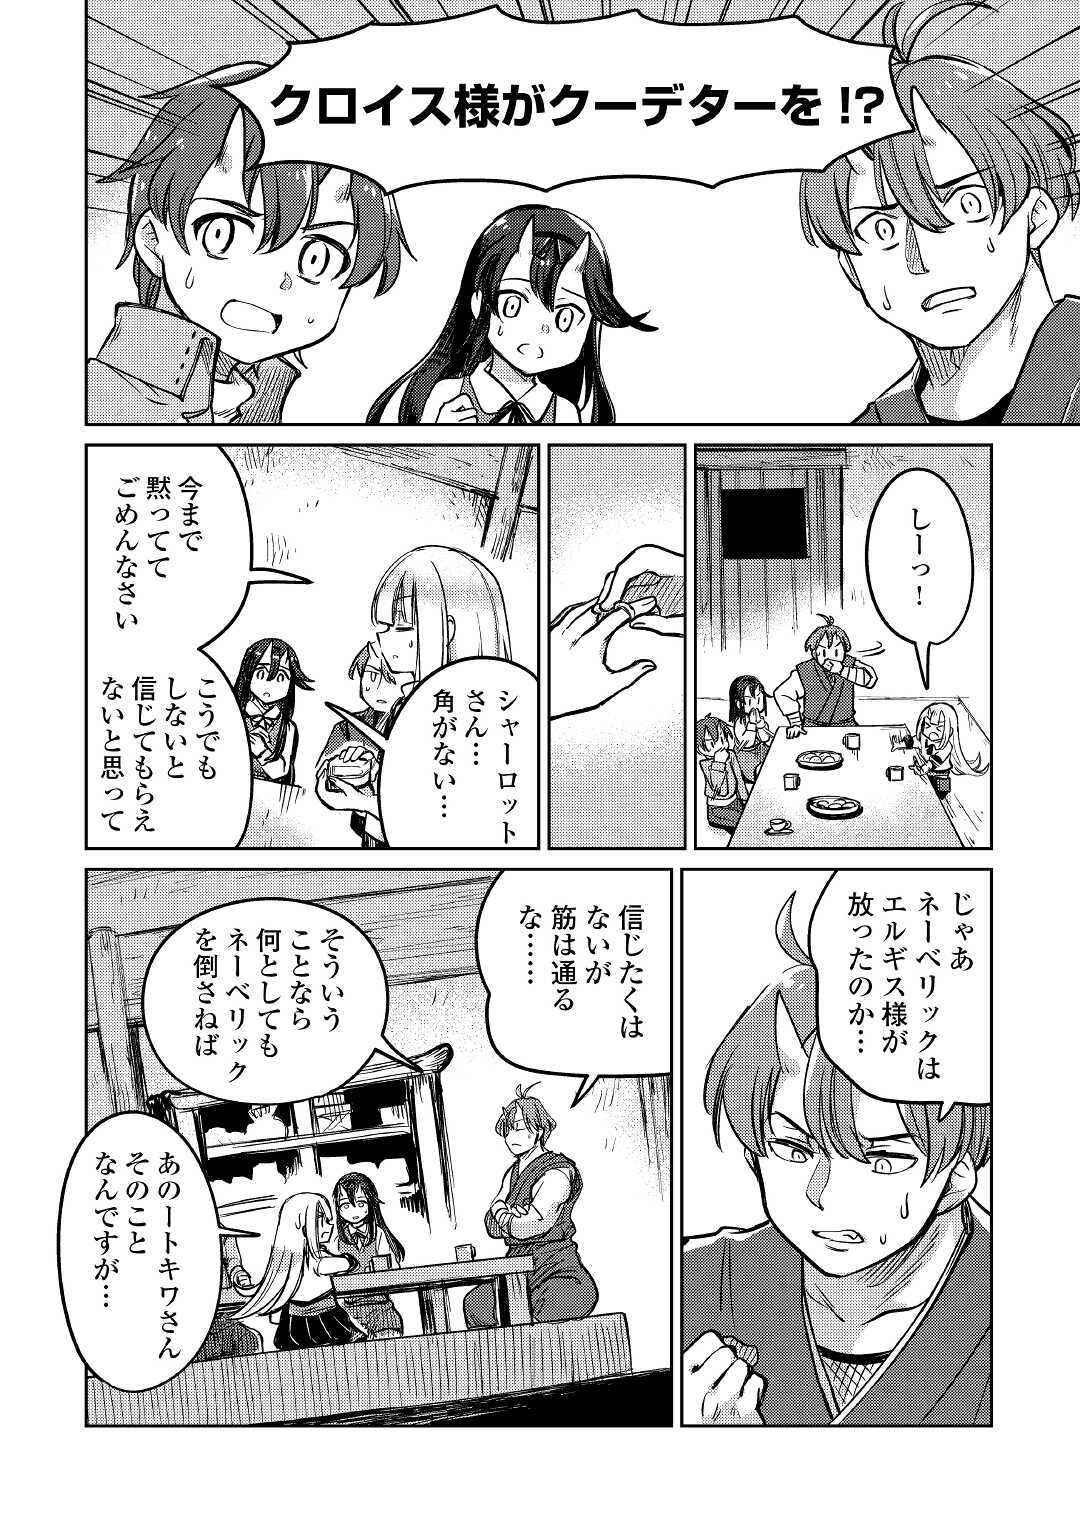 The Former Structural Researcher’s Story of Otherworldly Adventure 第31話 - Page 24